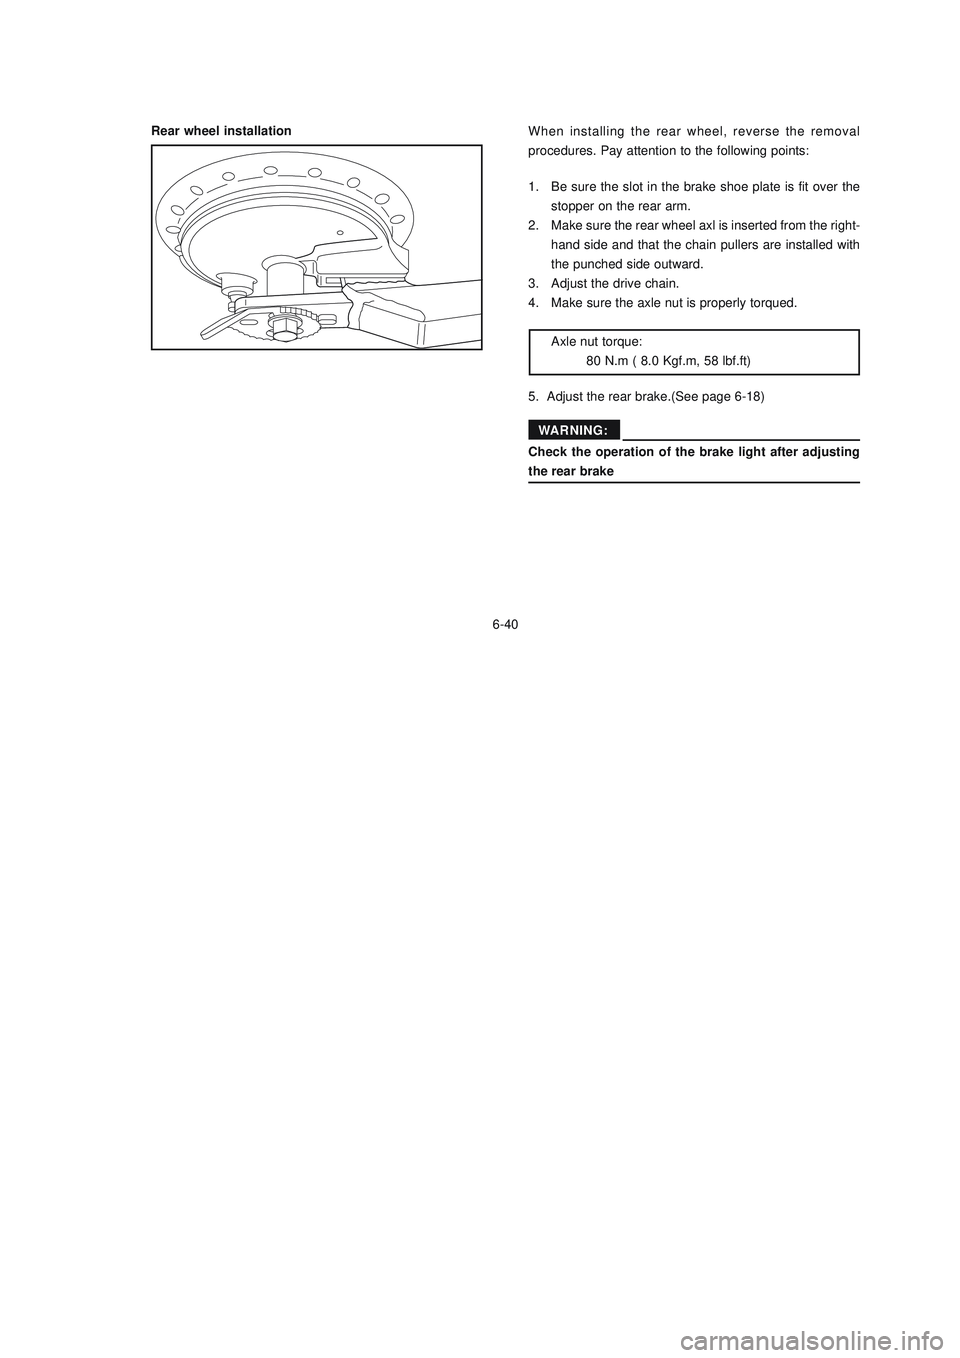 YAMAHA XTZ125 2008  Owners Manual 6-40
6-40
Rear wheel installationWhen installing the rear wheel, reverse the removal
procedures. Pay attention to the following points:
1. Be sure the slot in the brake shoe plate is fit over the
stop